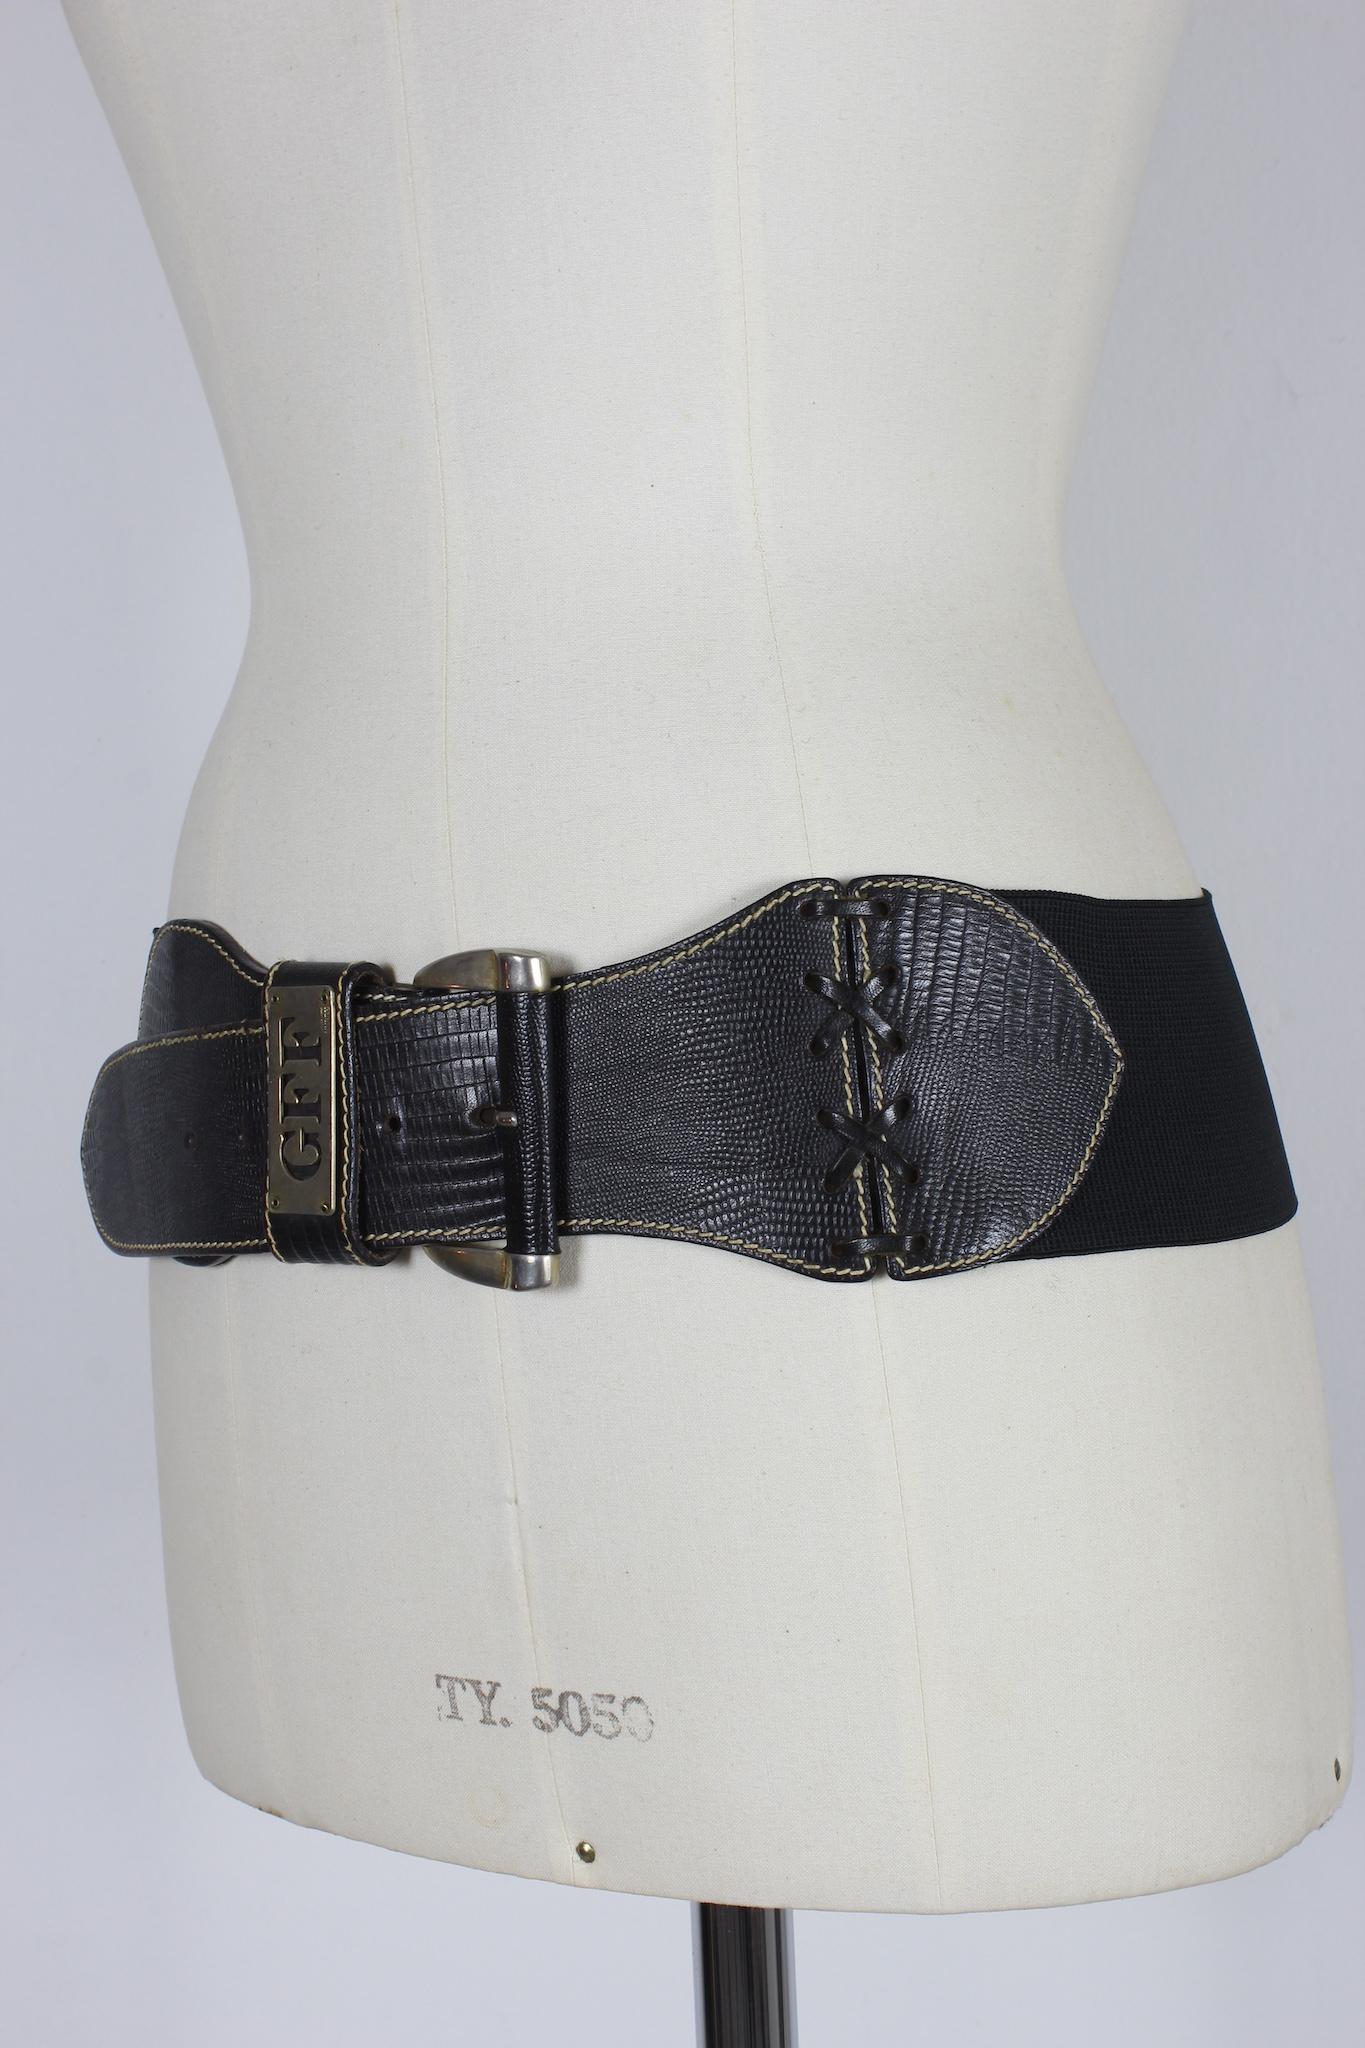 Gianfranco Ferre vintage 90s belt. Black color, elastic fabric with part of the closure in leather. Made in italy.

Length: 97 cm
Width: 8 cm